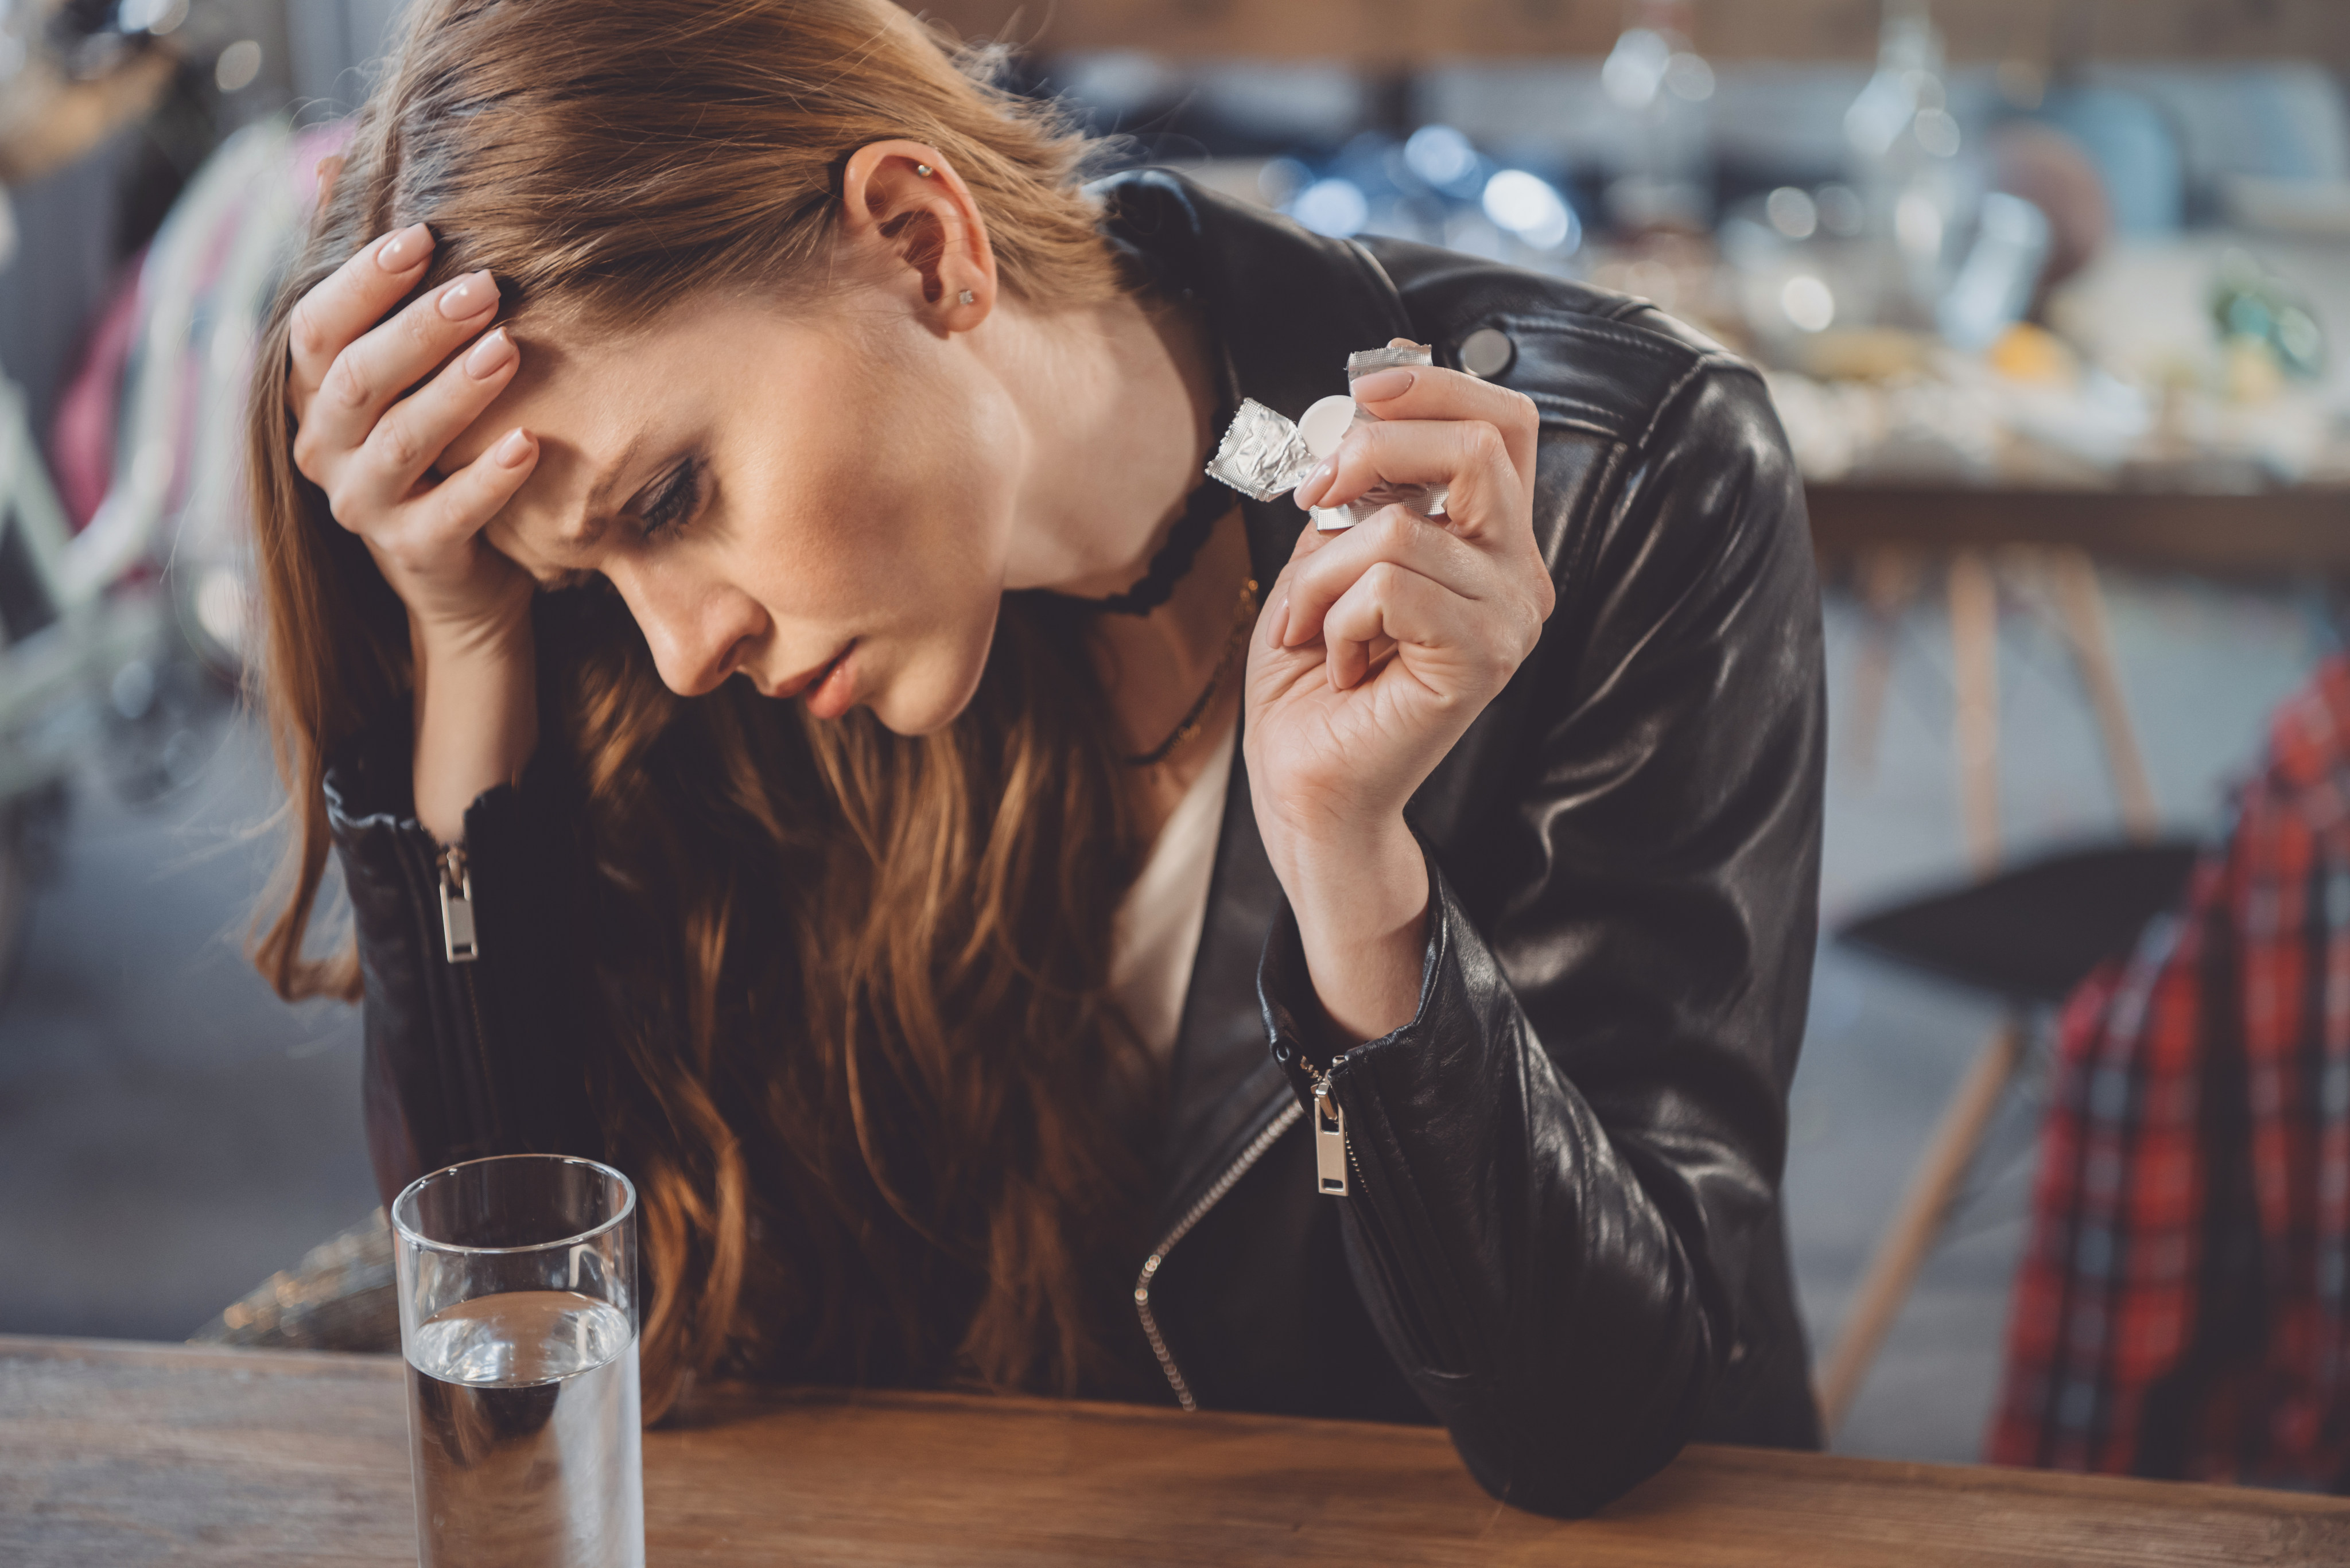 Feeling anxious and hung over after a night of heavy drinking? You may be experiencing “hangxiety” – a roller coaster of emotions as your brain and body recalibrate. Photo: Shutterstock